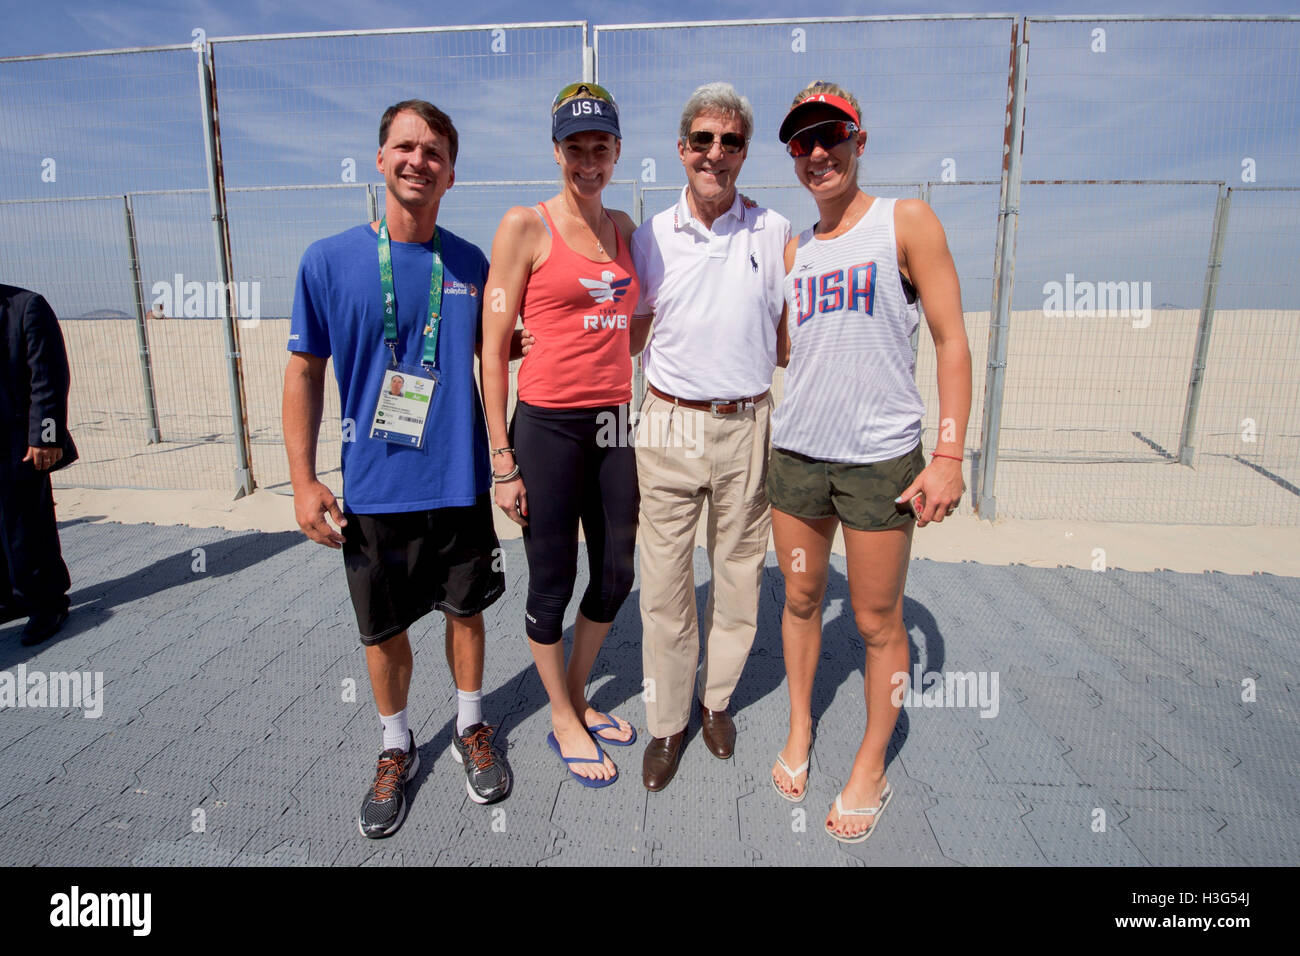 U.S. Secretary of State John Kerry poses for a photo with U.S. Olympic women's beach volleyball players Kerri Walsh and April Ross, and their coach Marcio Sicoli, on the Copacobana beach in Rio de Janiero, Brazil, on August 6, 2016, as he and his fellow members of the U.S. Presidential Delegation attend the Summer Olympics. Stock Photo